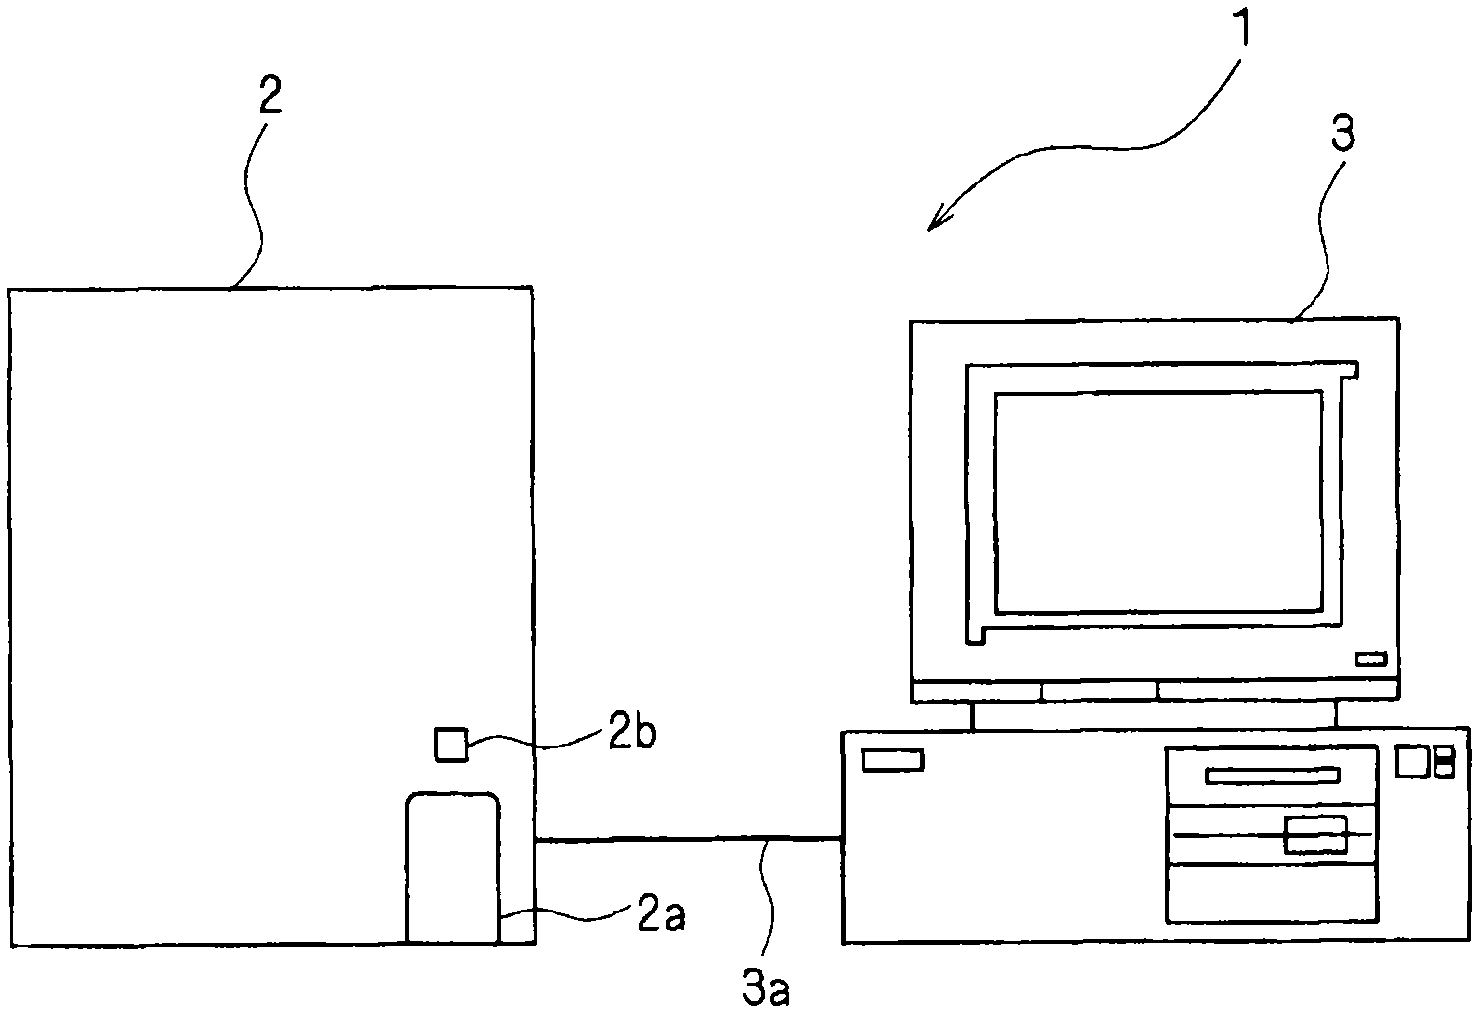 Blood cell counter, diagnosis support method and computer program product